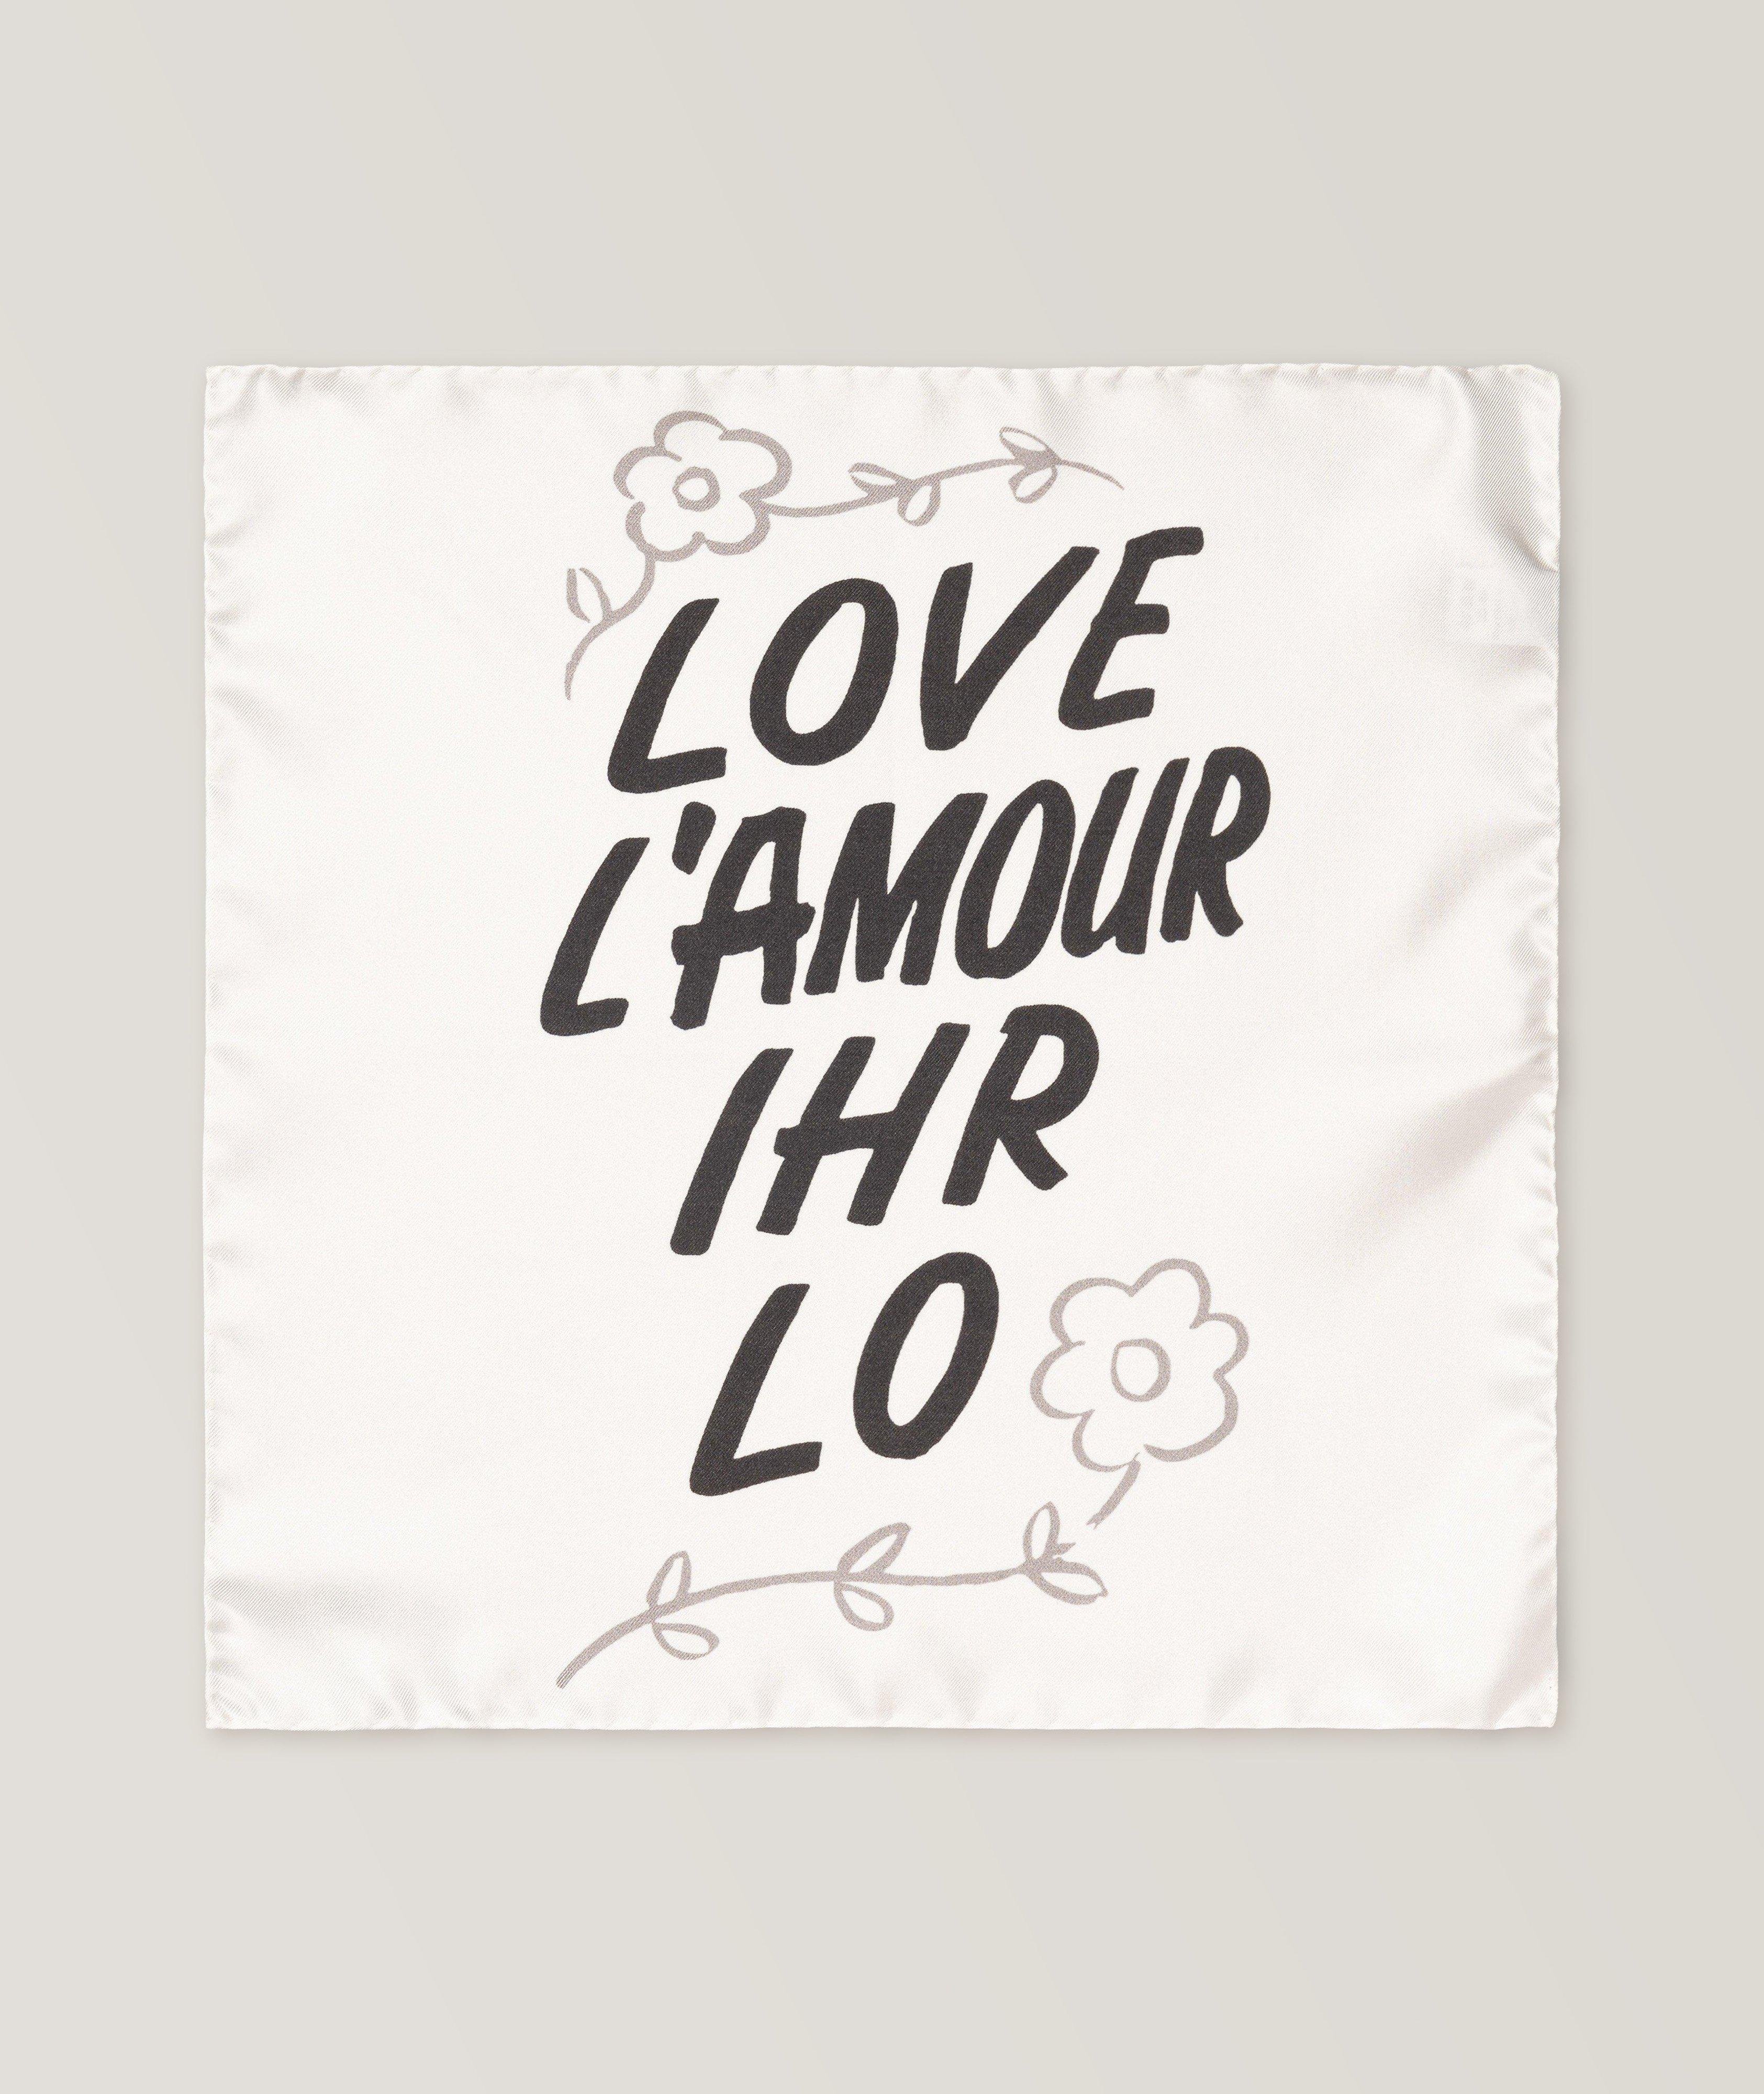 The Beatles Collection "Love L'Amour Ihr Lo" Silk Pocket Square image 0